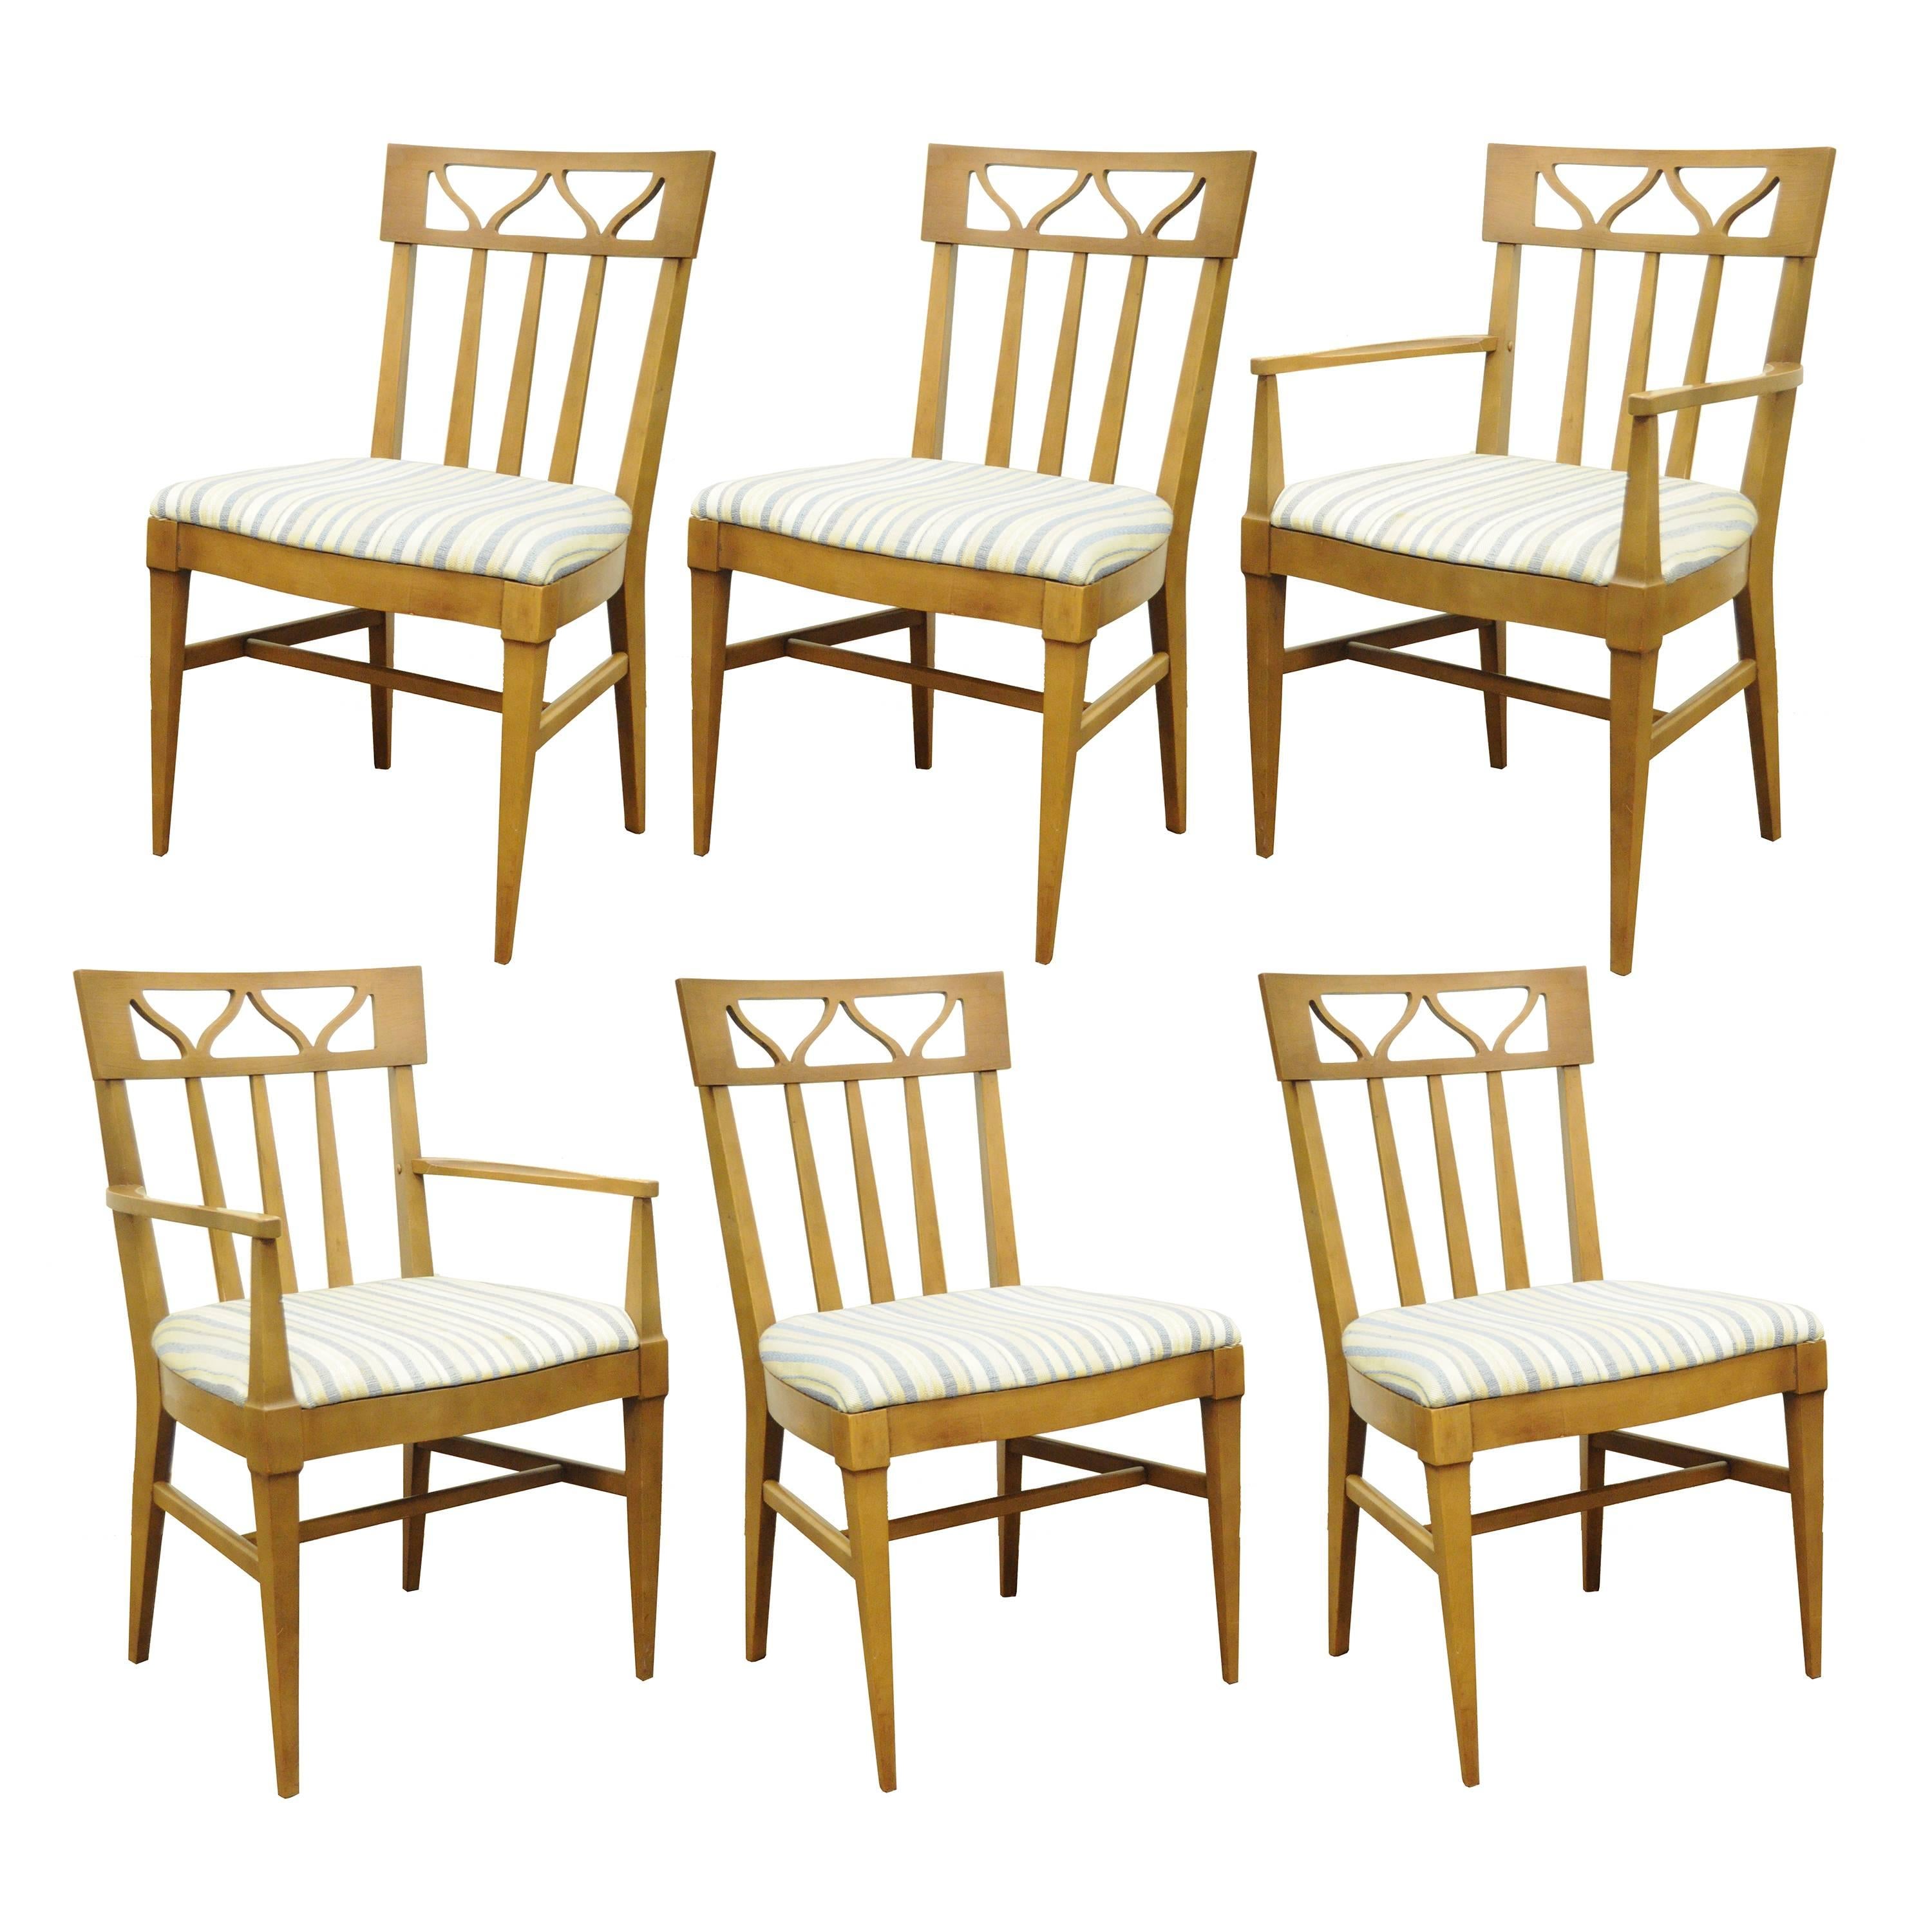 Vintage Mid-Century Modern ten-piece walnut wood dining room set by Broyhill Premier Invitation Grouping. Set consists of six dining chairs (Four side chairs, two armchairs), china cabinet, sideboard, server and table with (3) 12